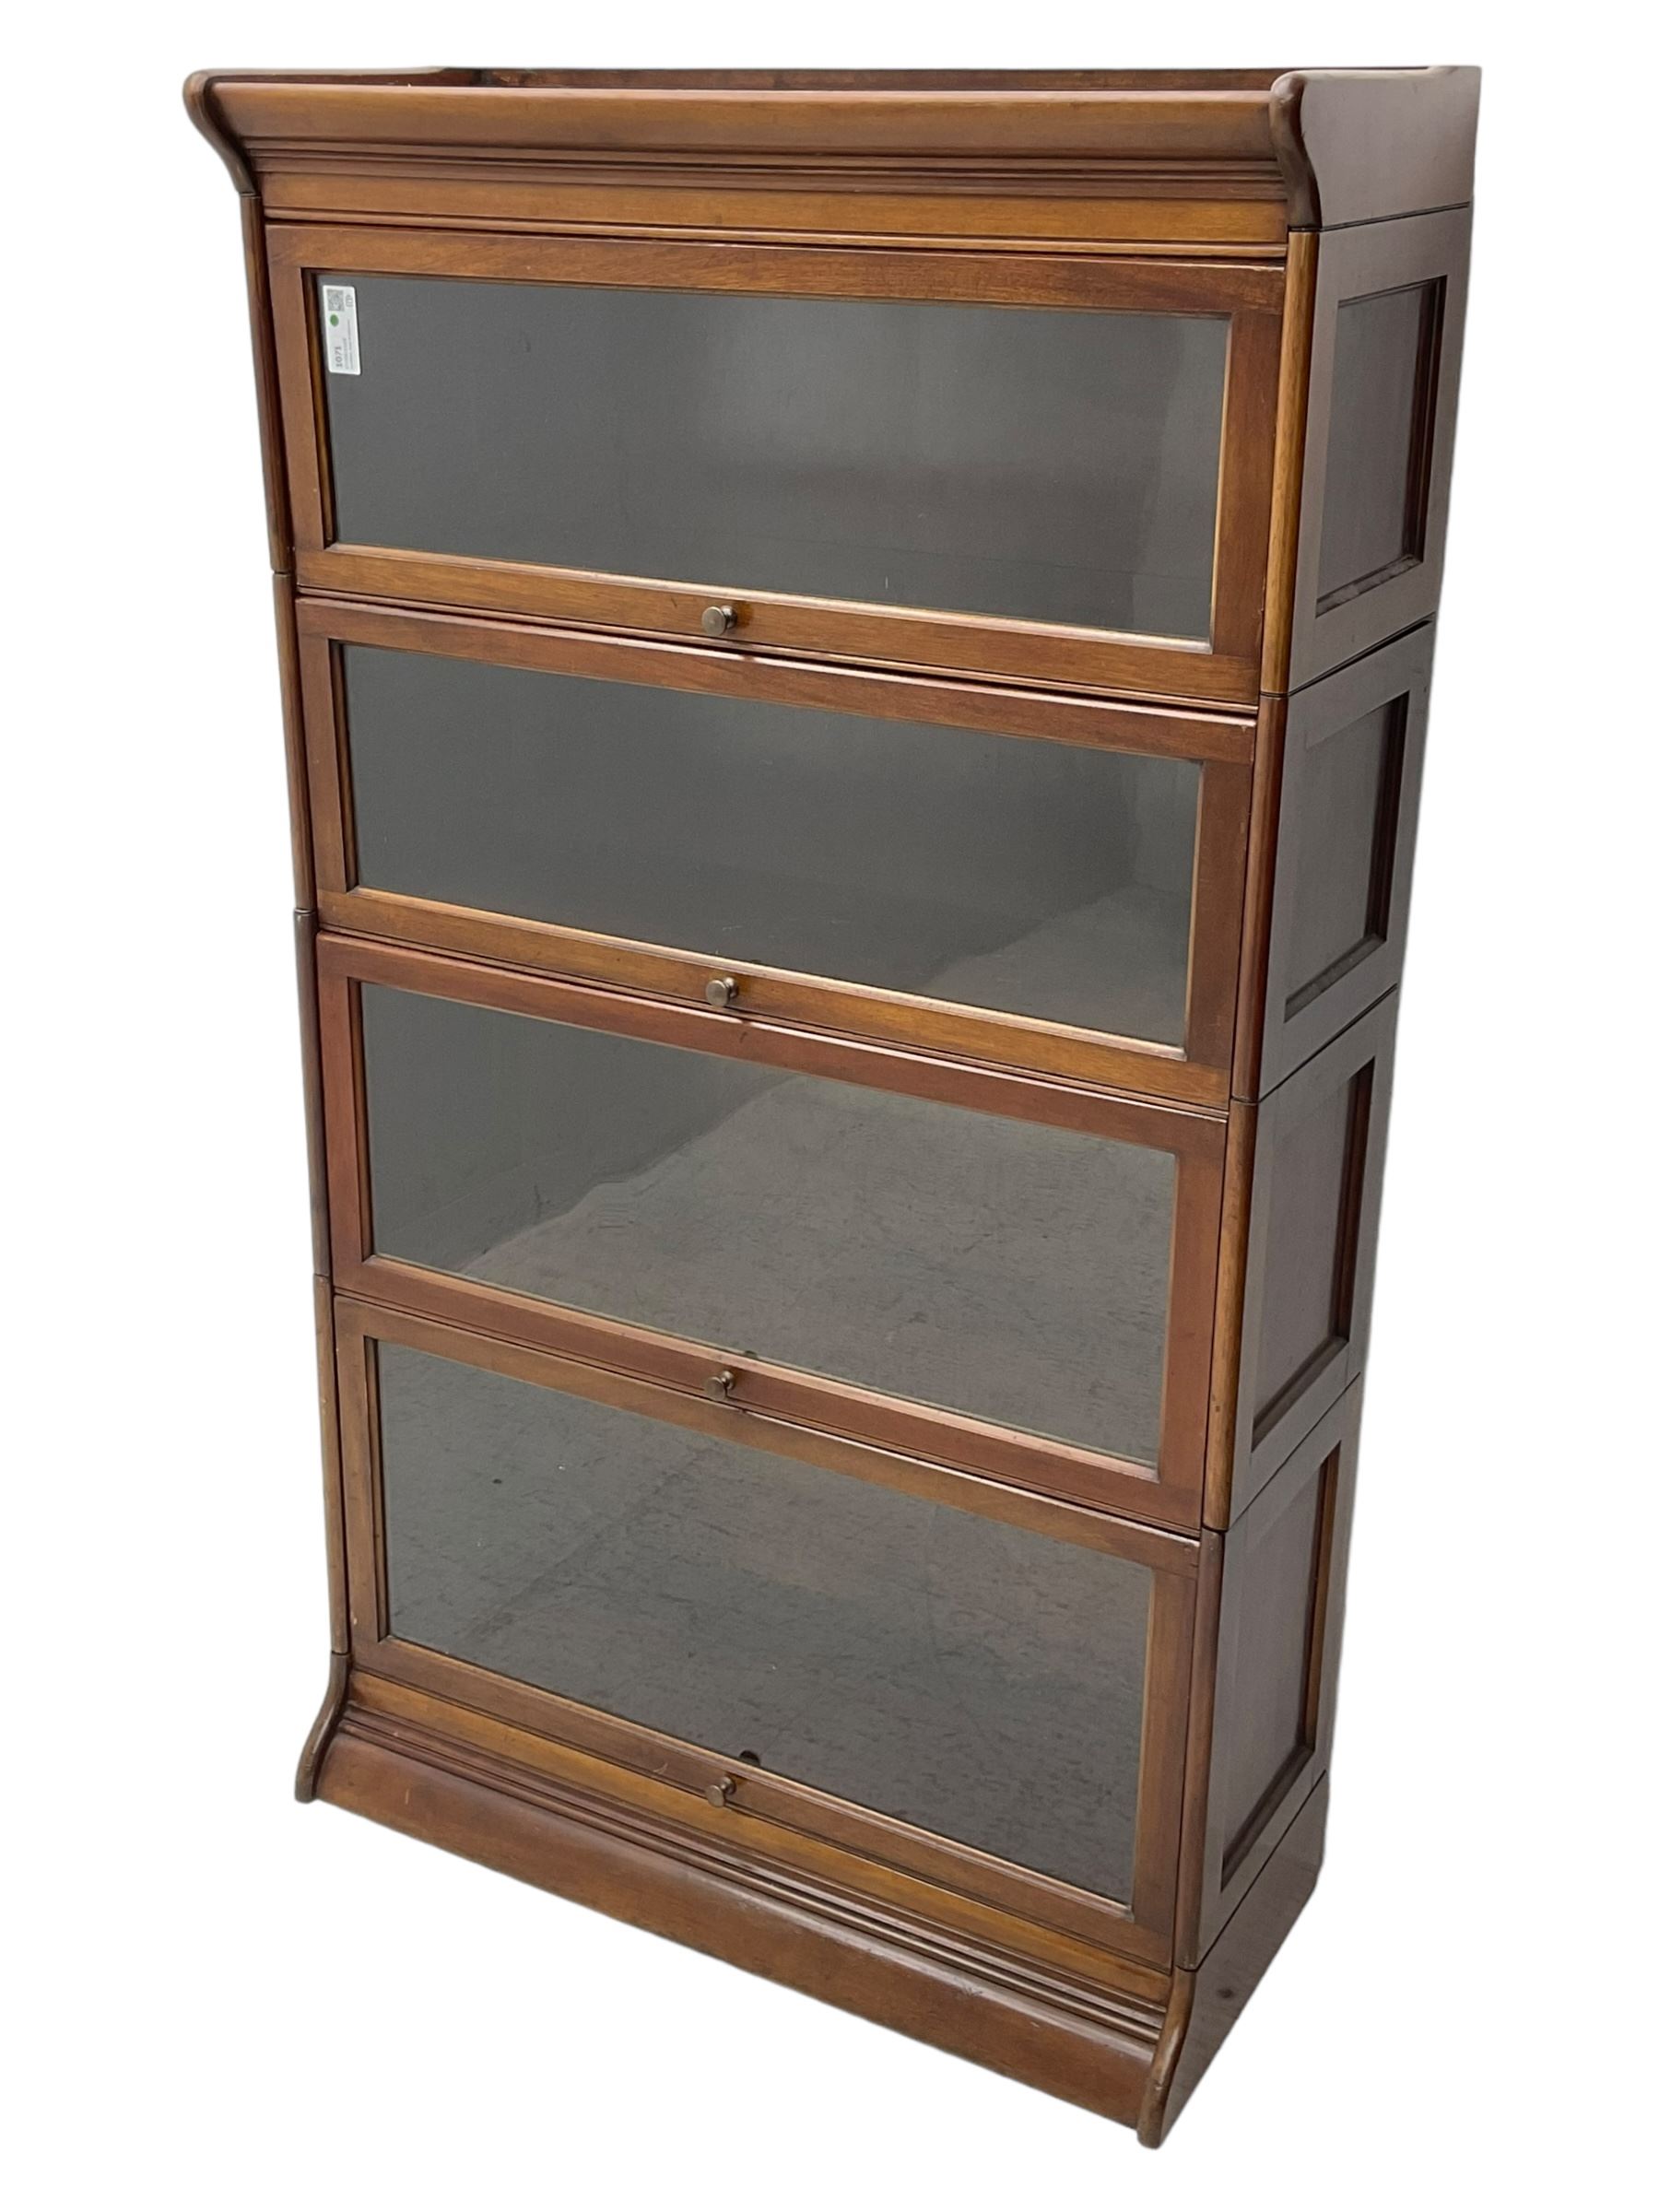 Early 20th century mahogany stacking library bookcase - Image 4 of 4